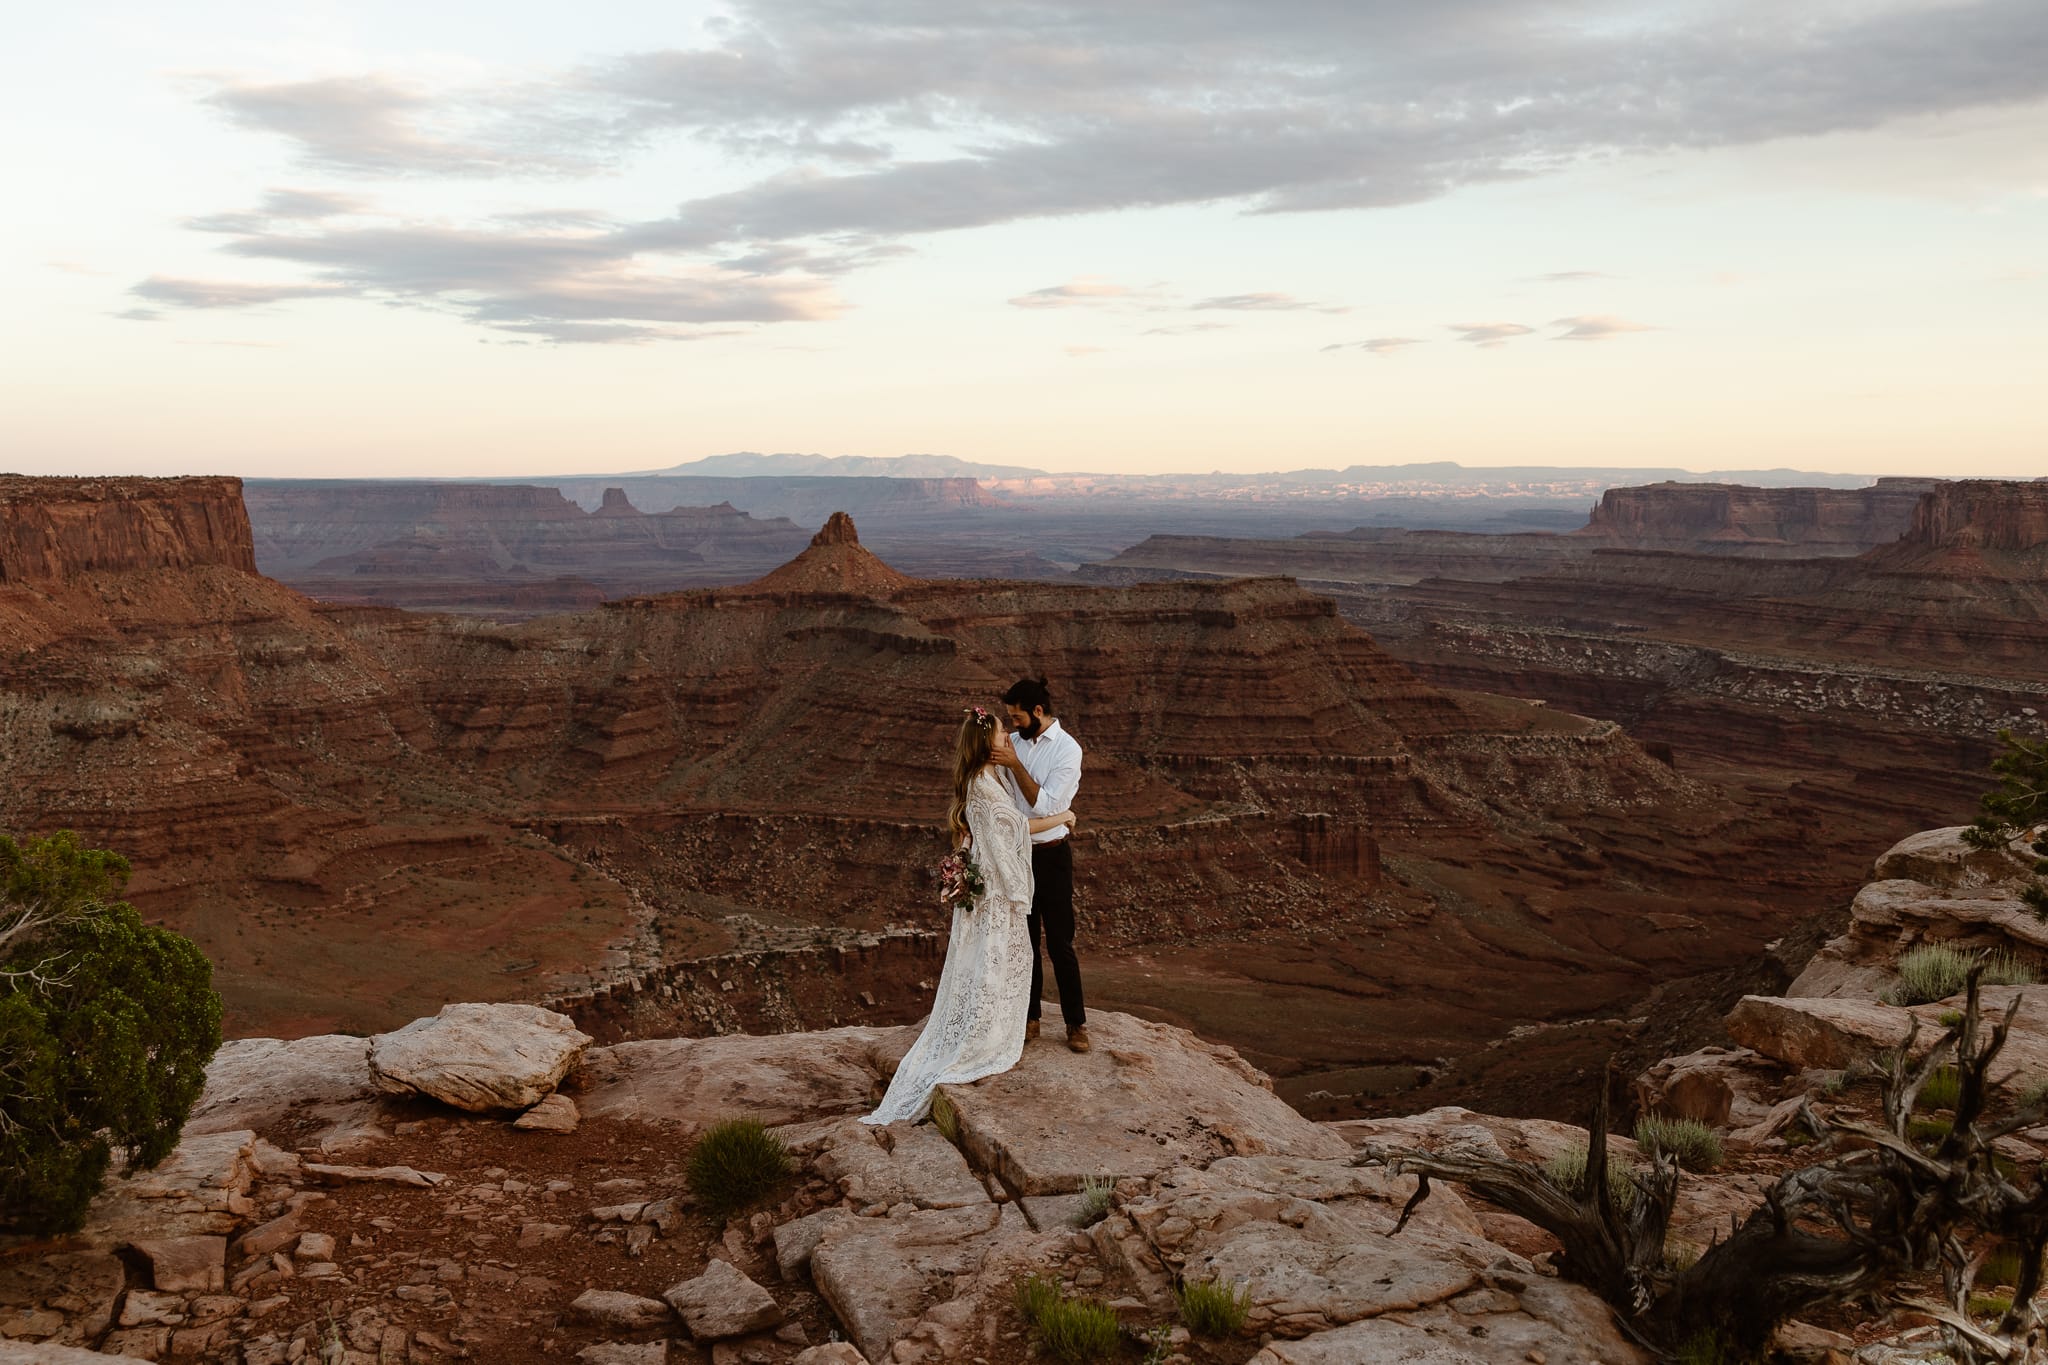 a couple wearing wedding attire standing on the cliffs edge in the desert during sunset